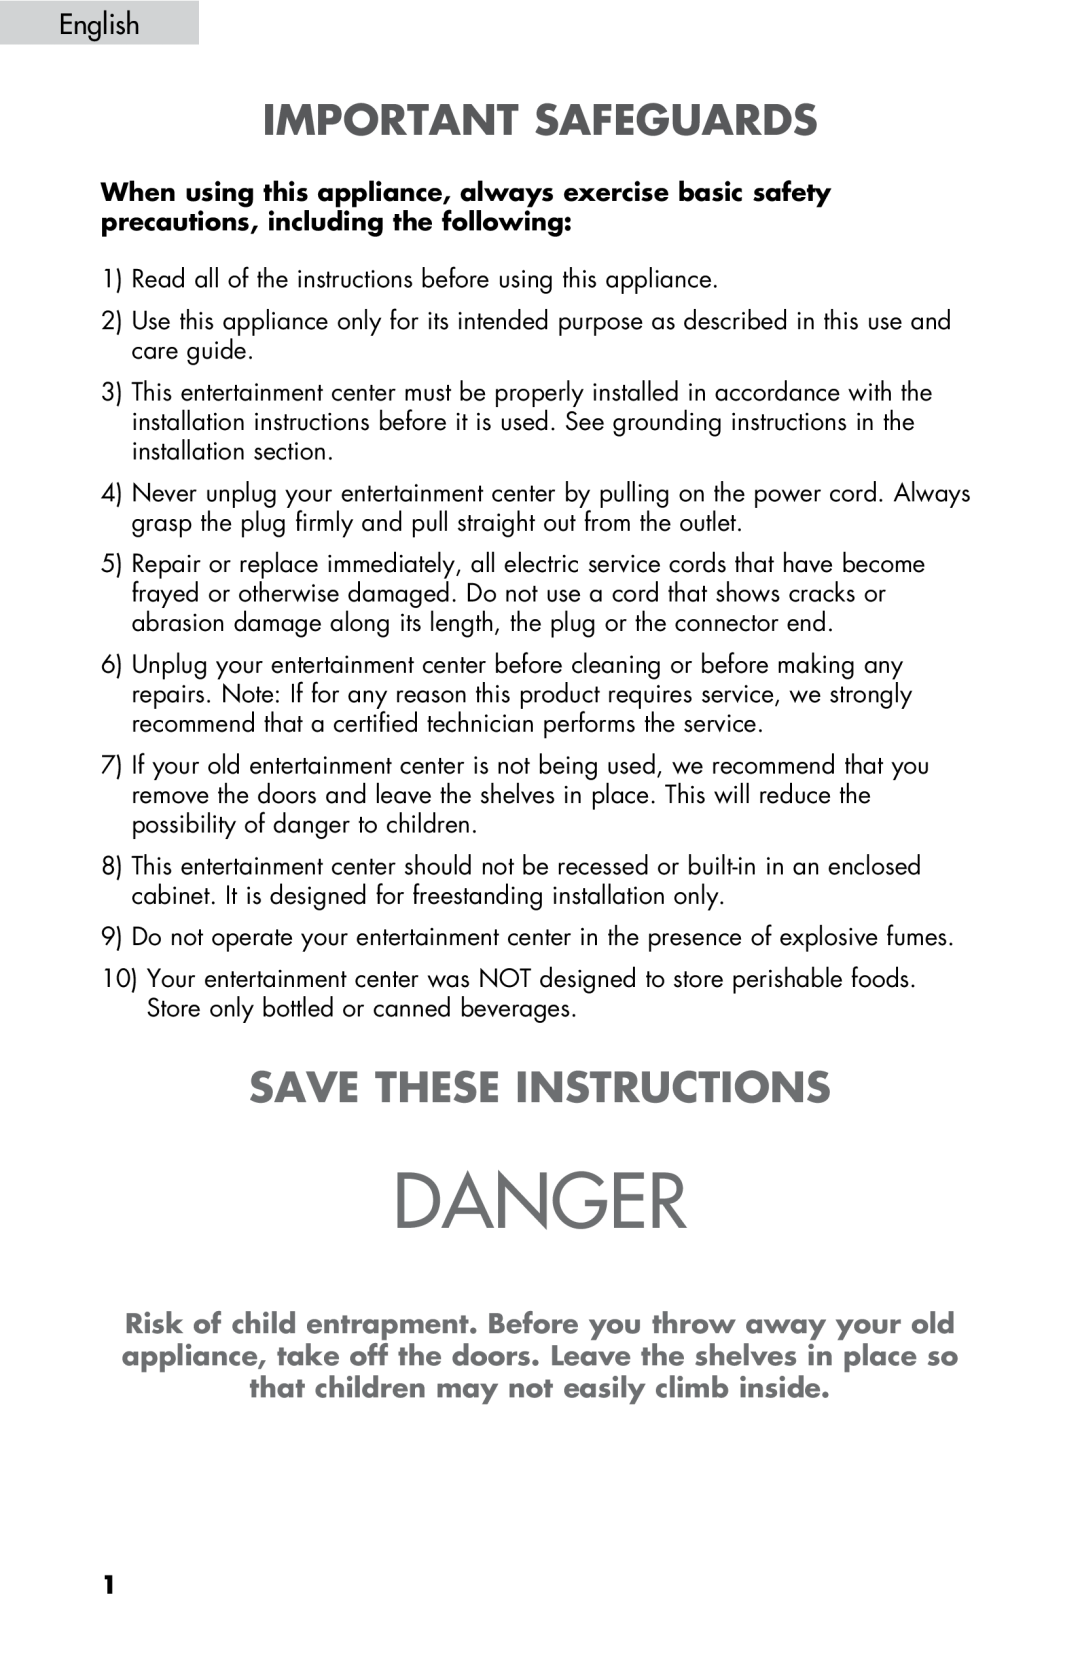 Haier ZHBCN05FVS user manual Danger, Important Safeguards, Save These Instructions, English 